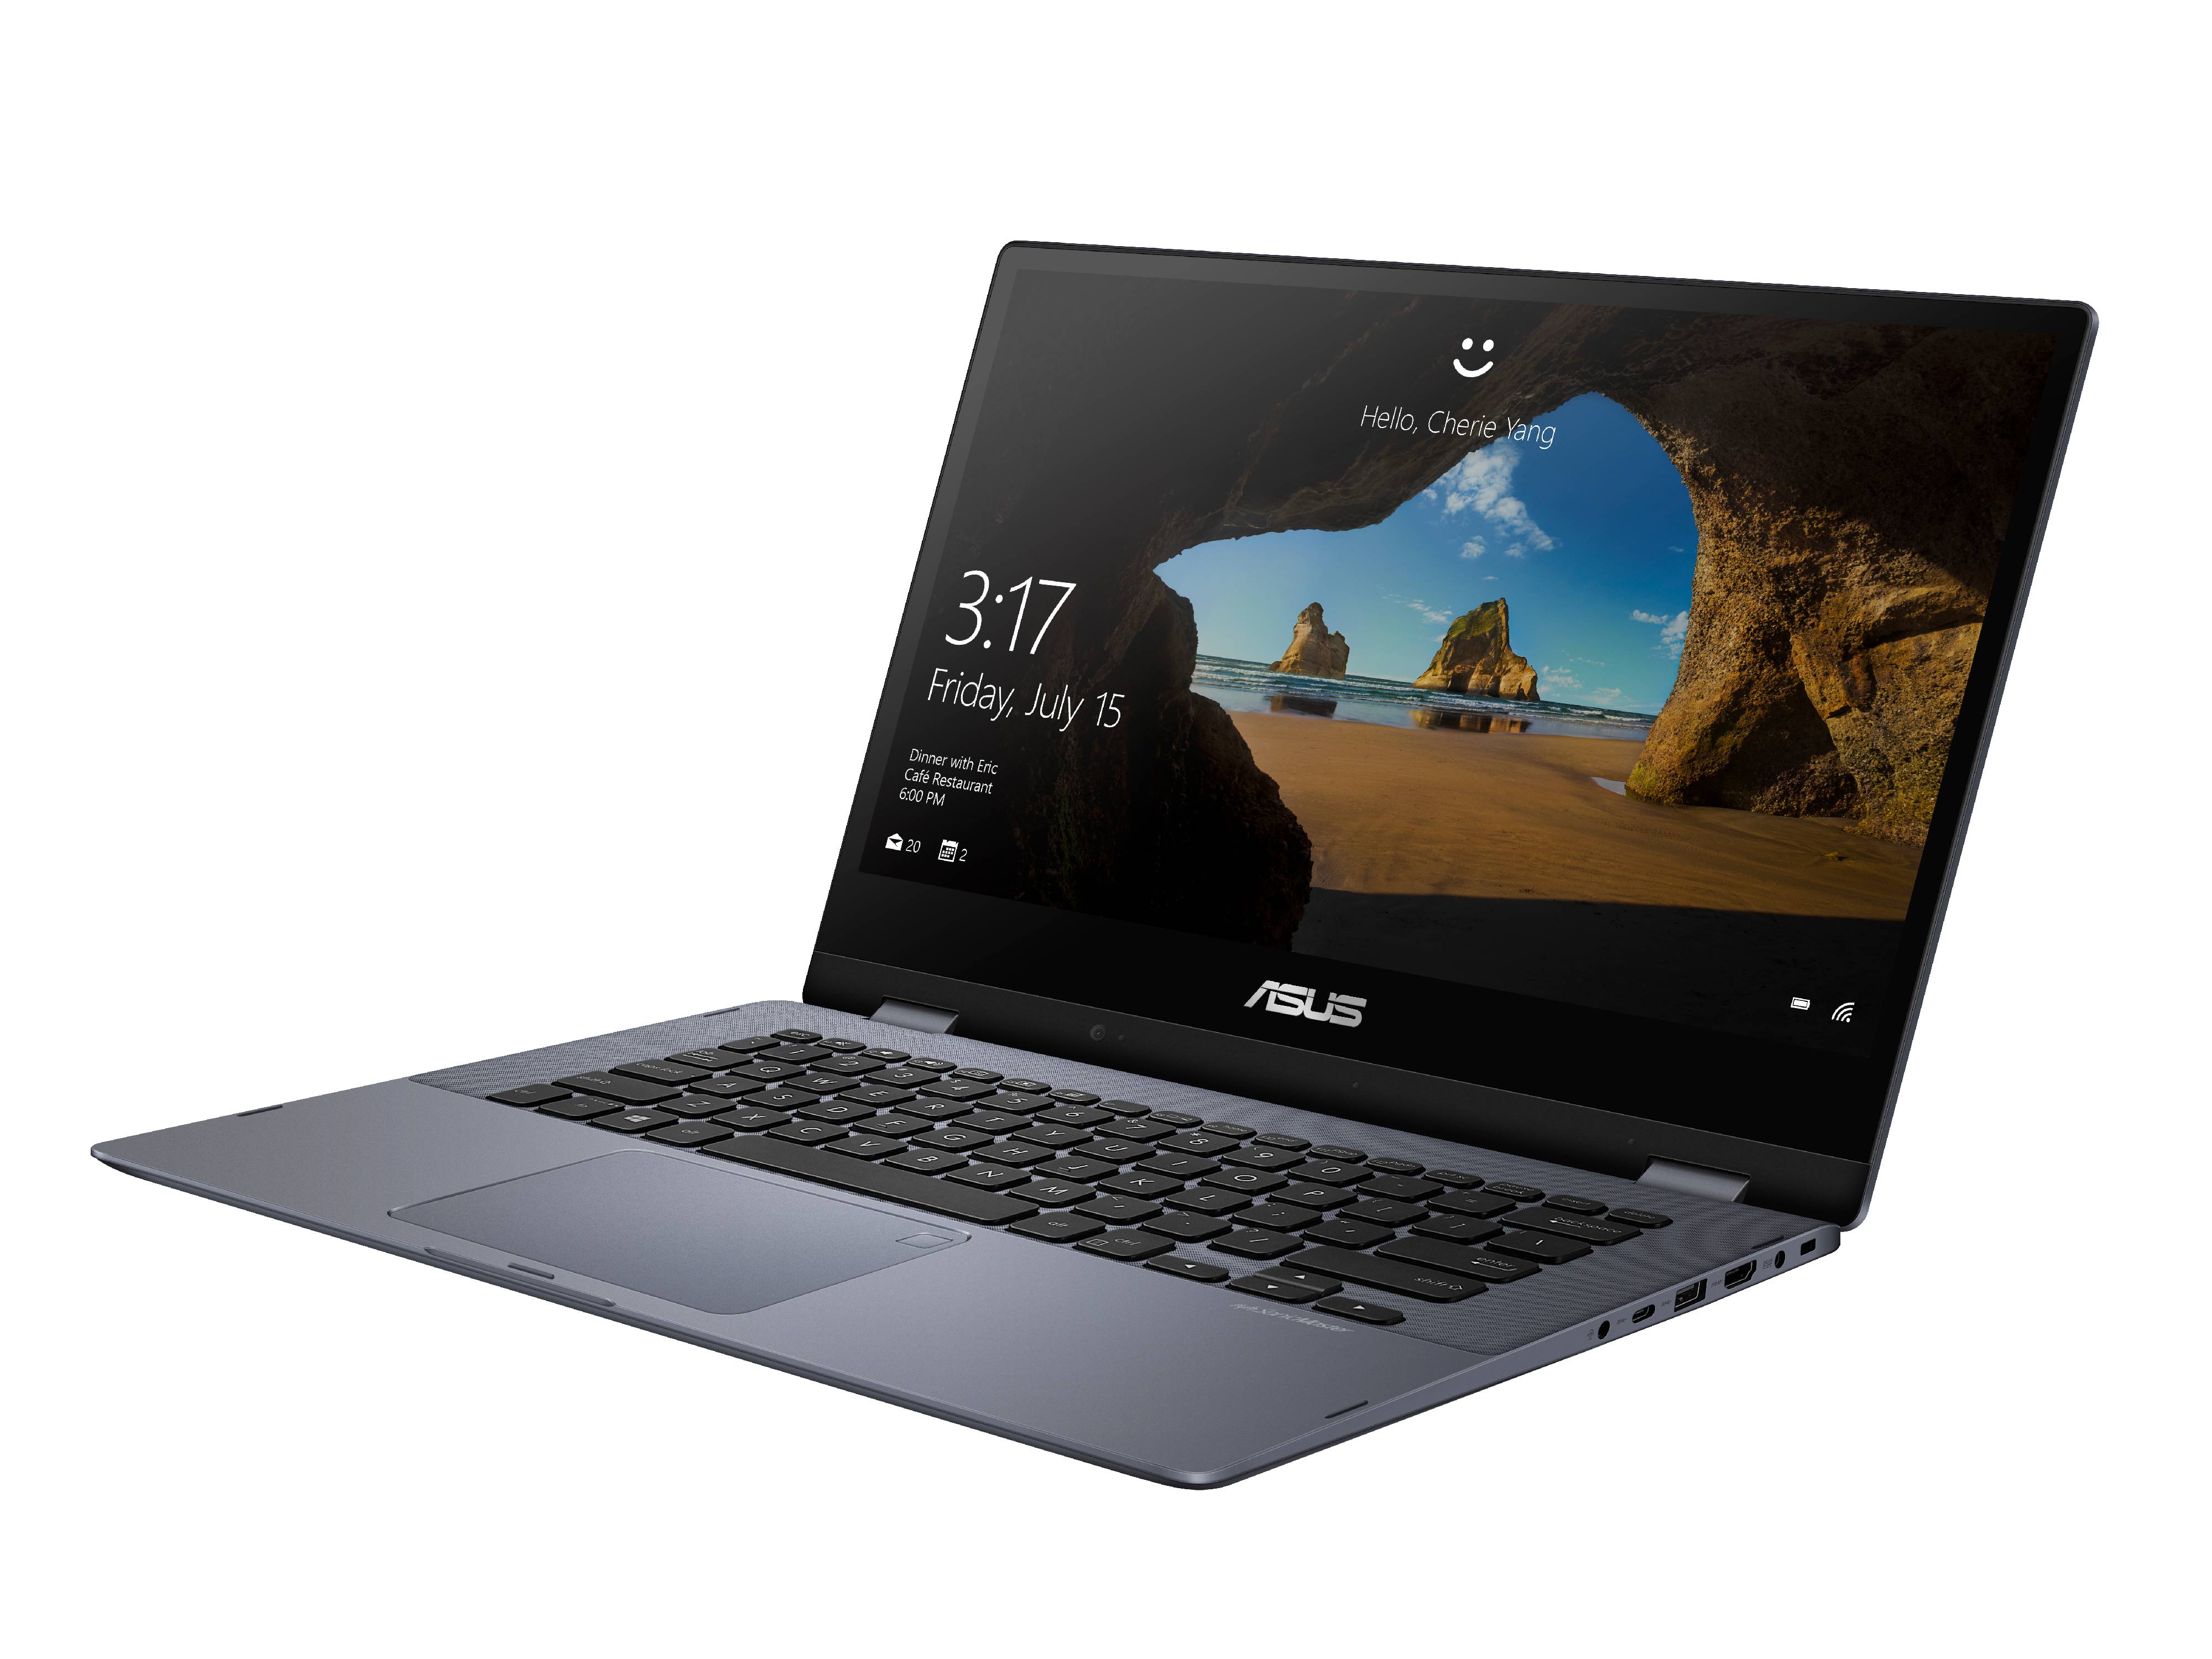 ASUS VivoBook Flip 14 Thin and Lightweight 2-in-1 Full HD Touchscreen Laptop, 8th Gen Intel Core i3-8130U Processor (up to 3.4GHz), 4GB DDR4 RAM, 128GB SSD, Windows 10, TP412UA-IH31T - image 5 of 12